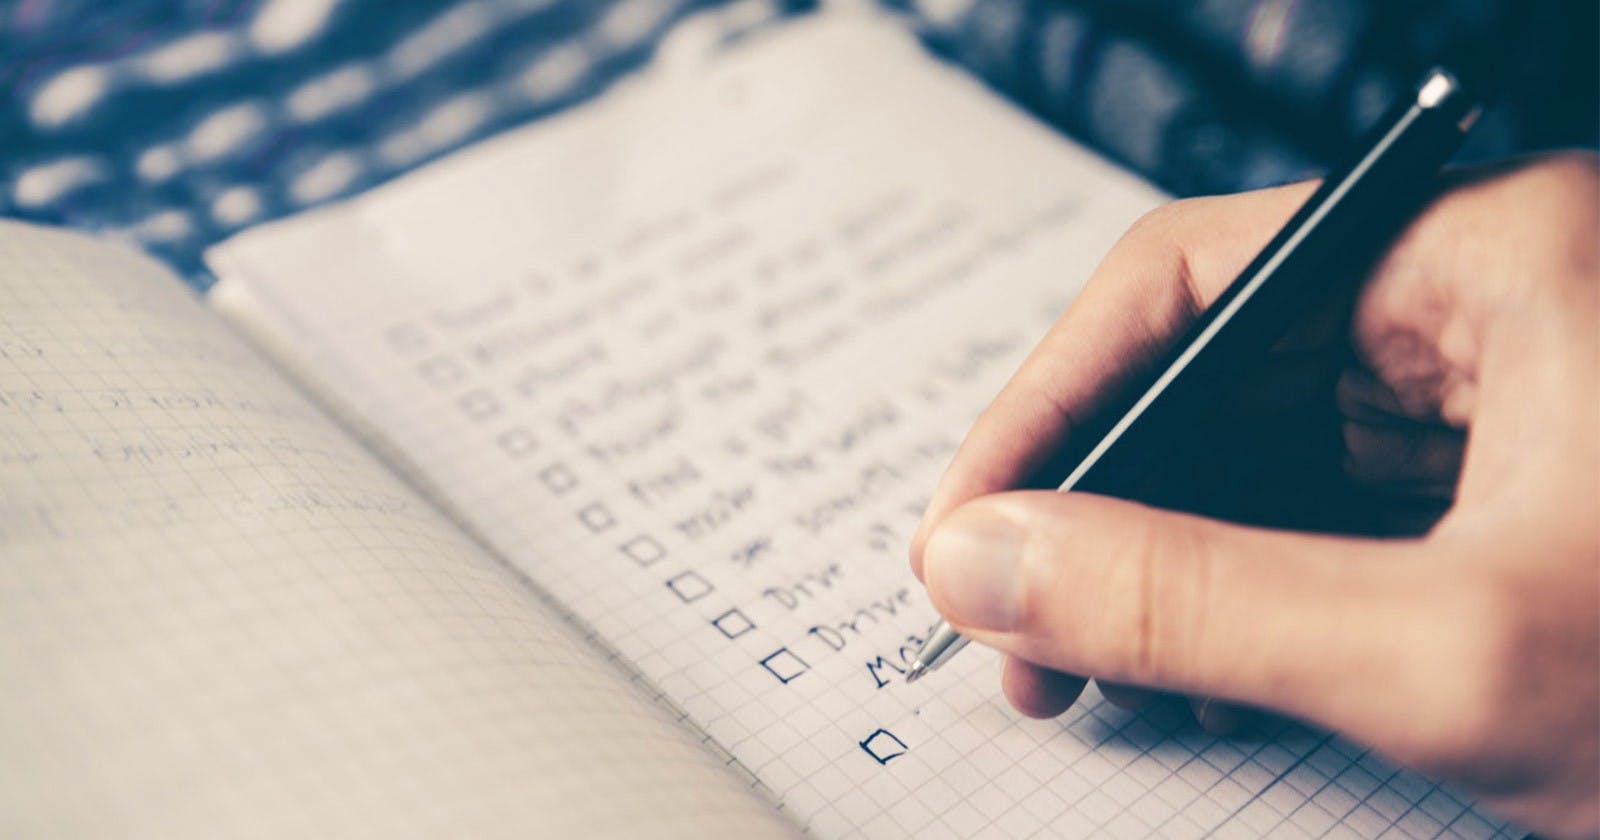 Tips & Tricks for Using To-Do Lists Effectively